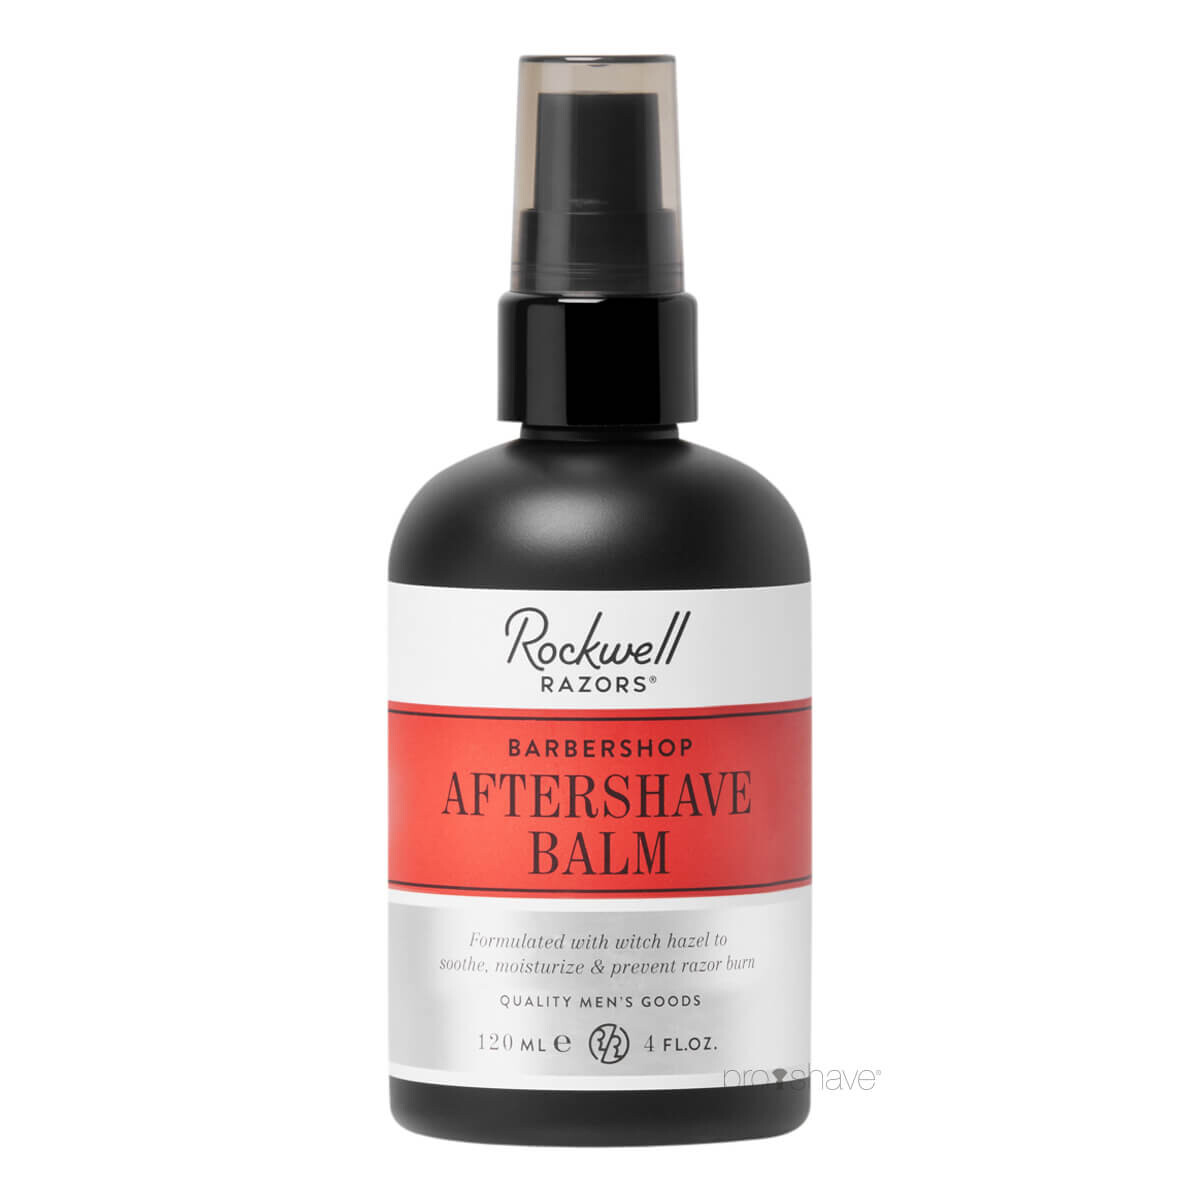 Rockwell Aftershave Balm, Barbershop Scent, 120 ml.